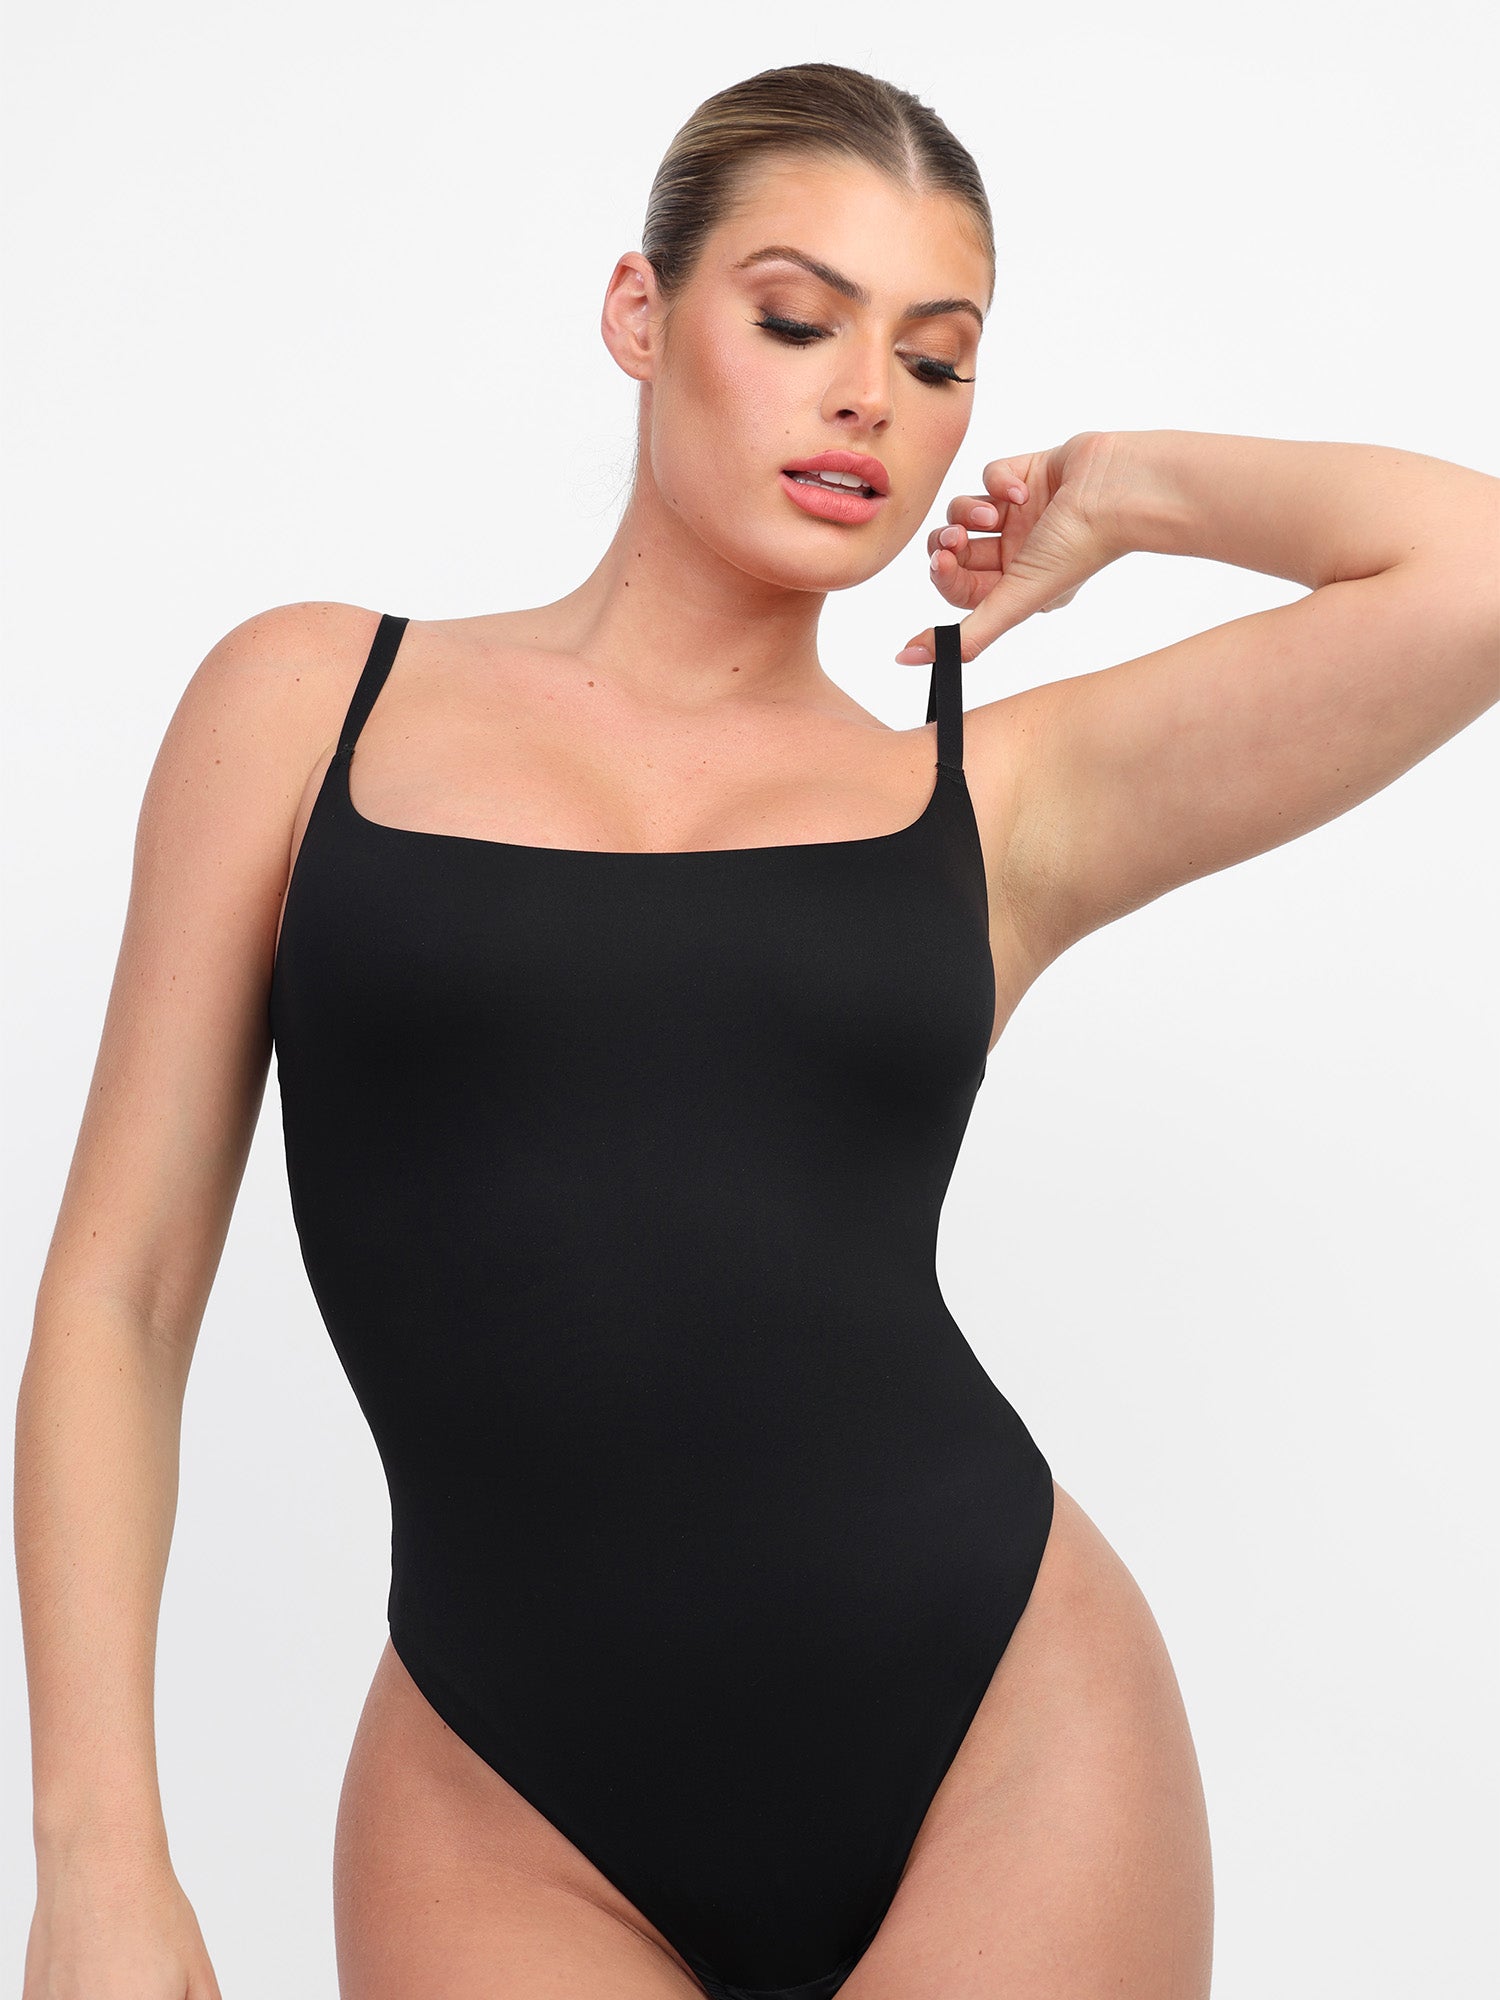 Made with CloudSense fabric, the Soft High-Cut Thong Shapewear Bodysuit sculpts your figure.